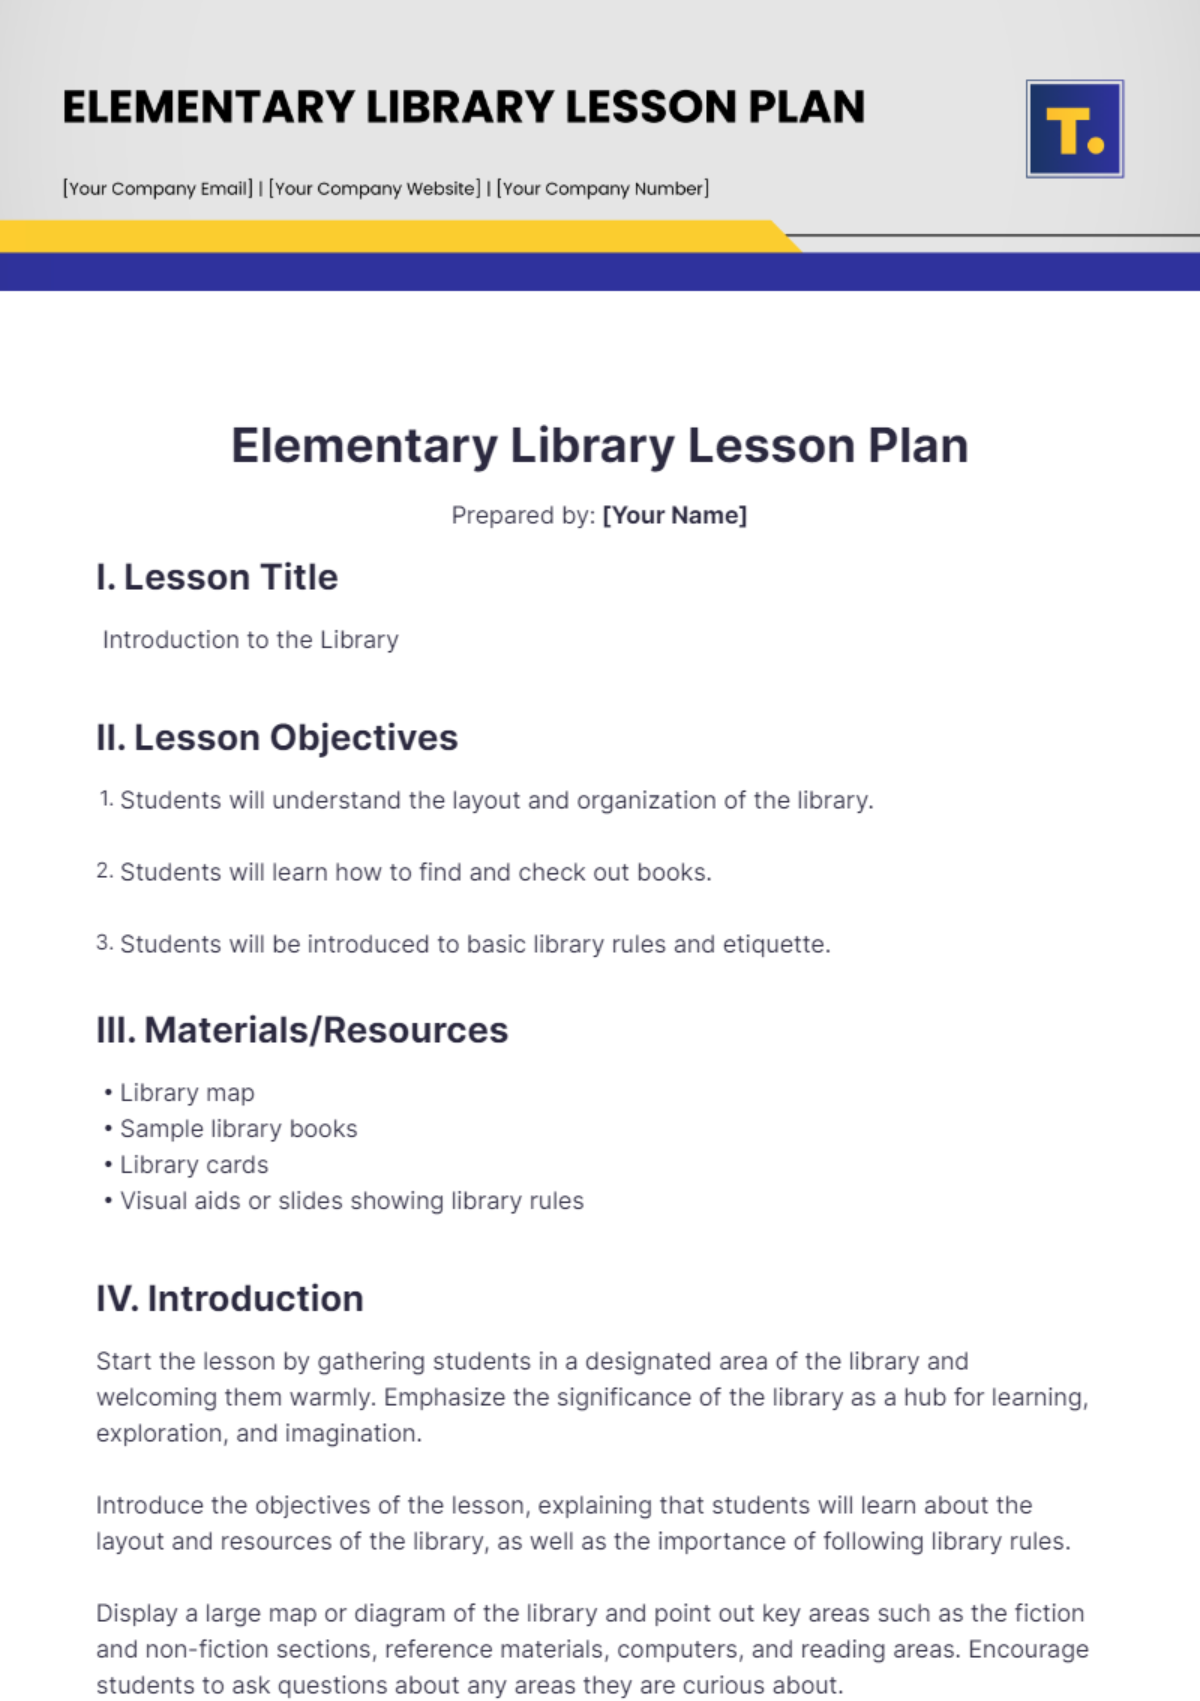 Free Elementary Library Lesson Plan Template